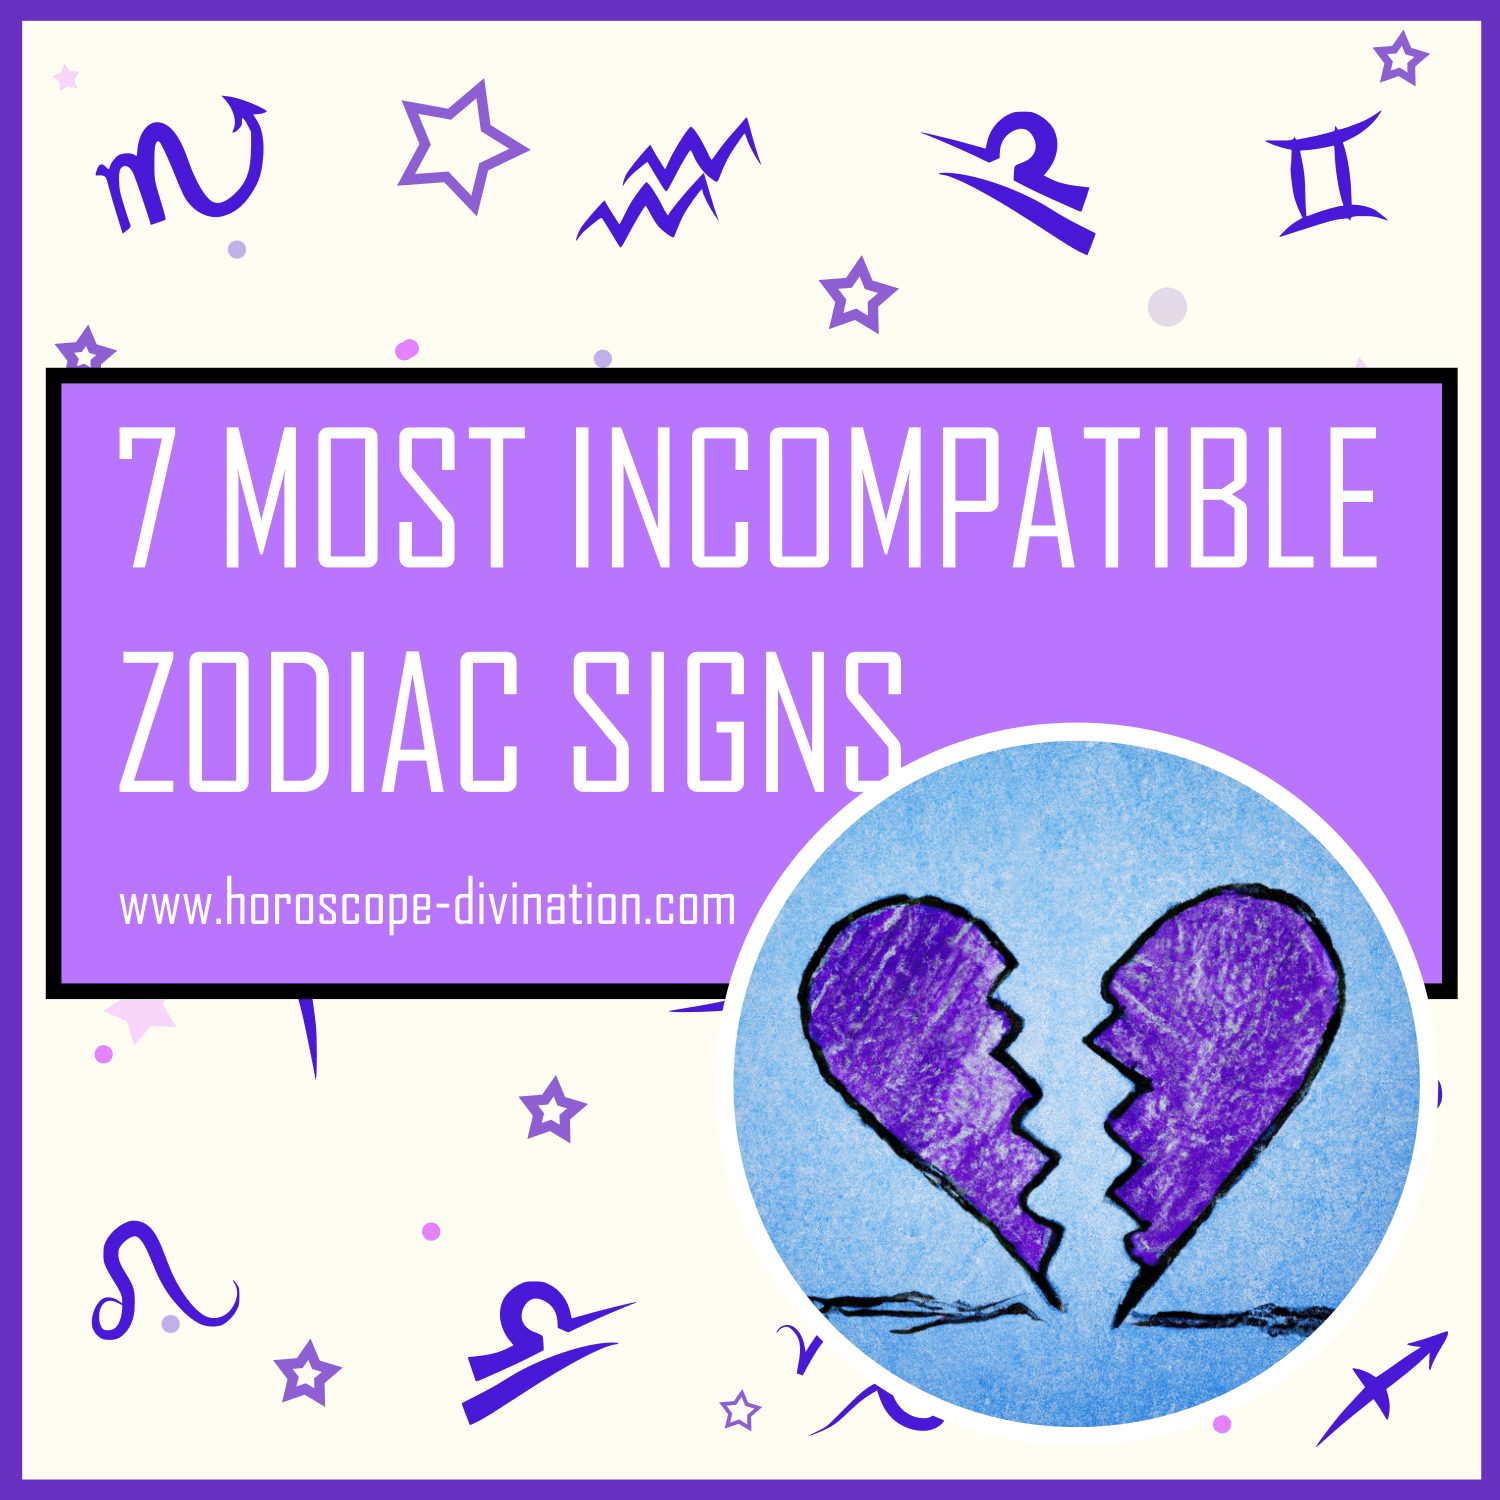 Incompatible Signs